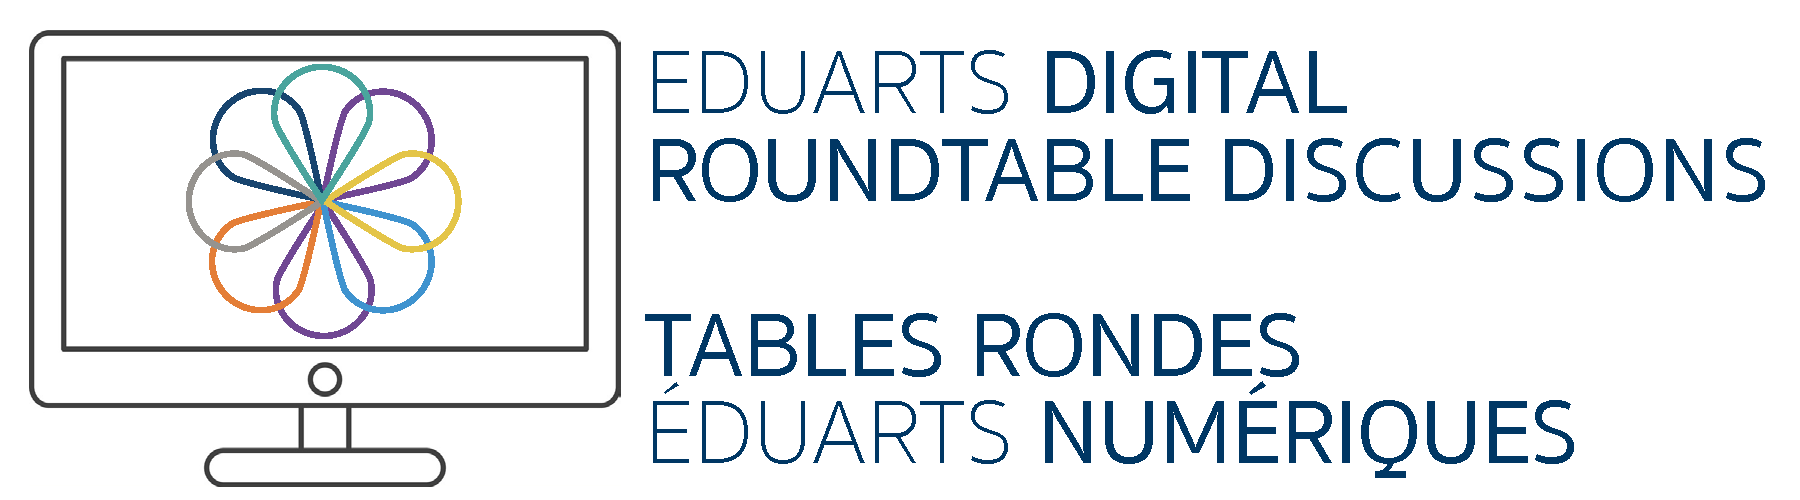 Eduarts Roundtable Discussions